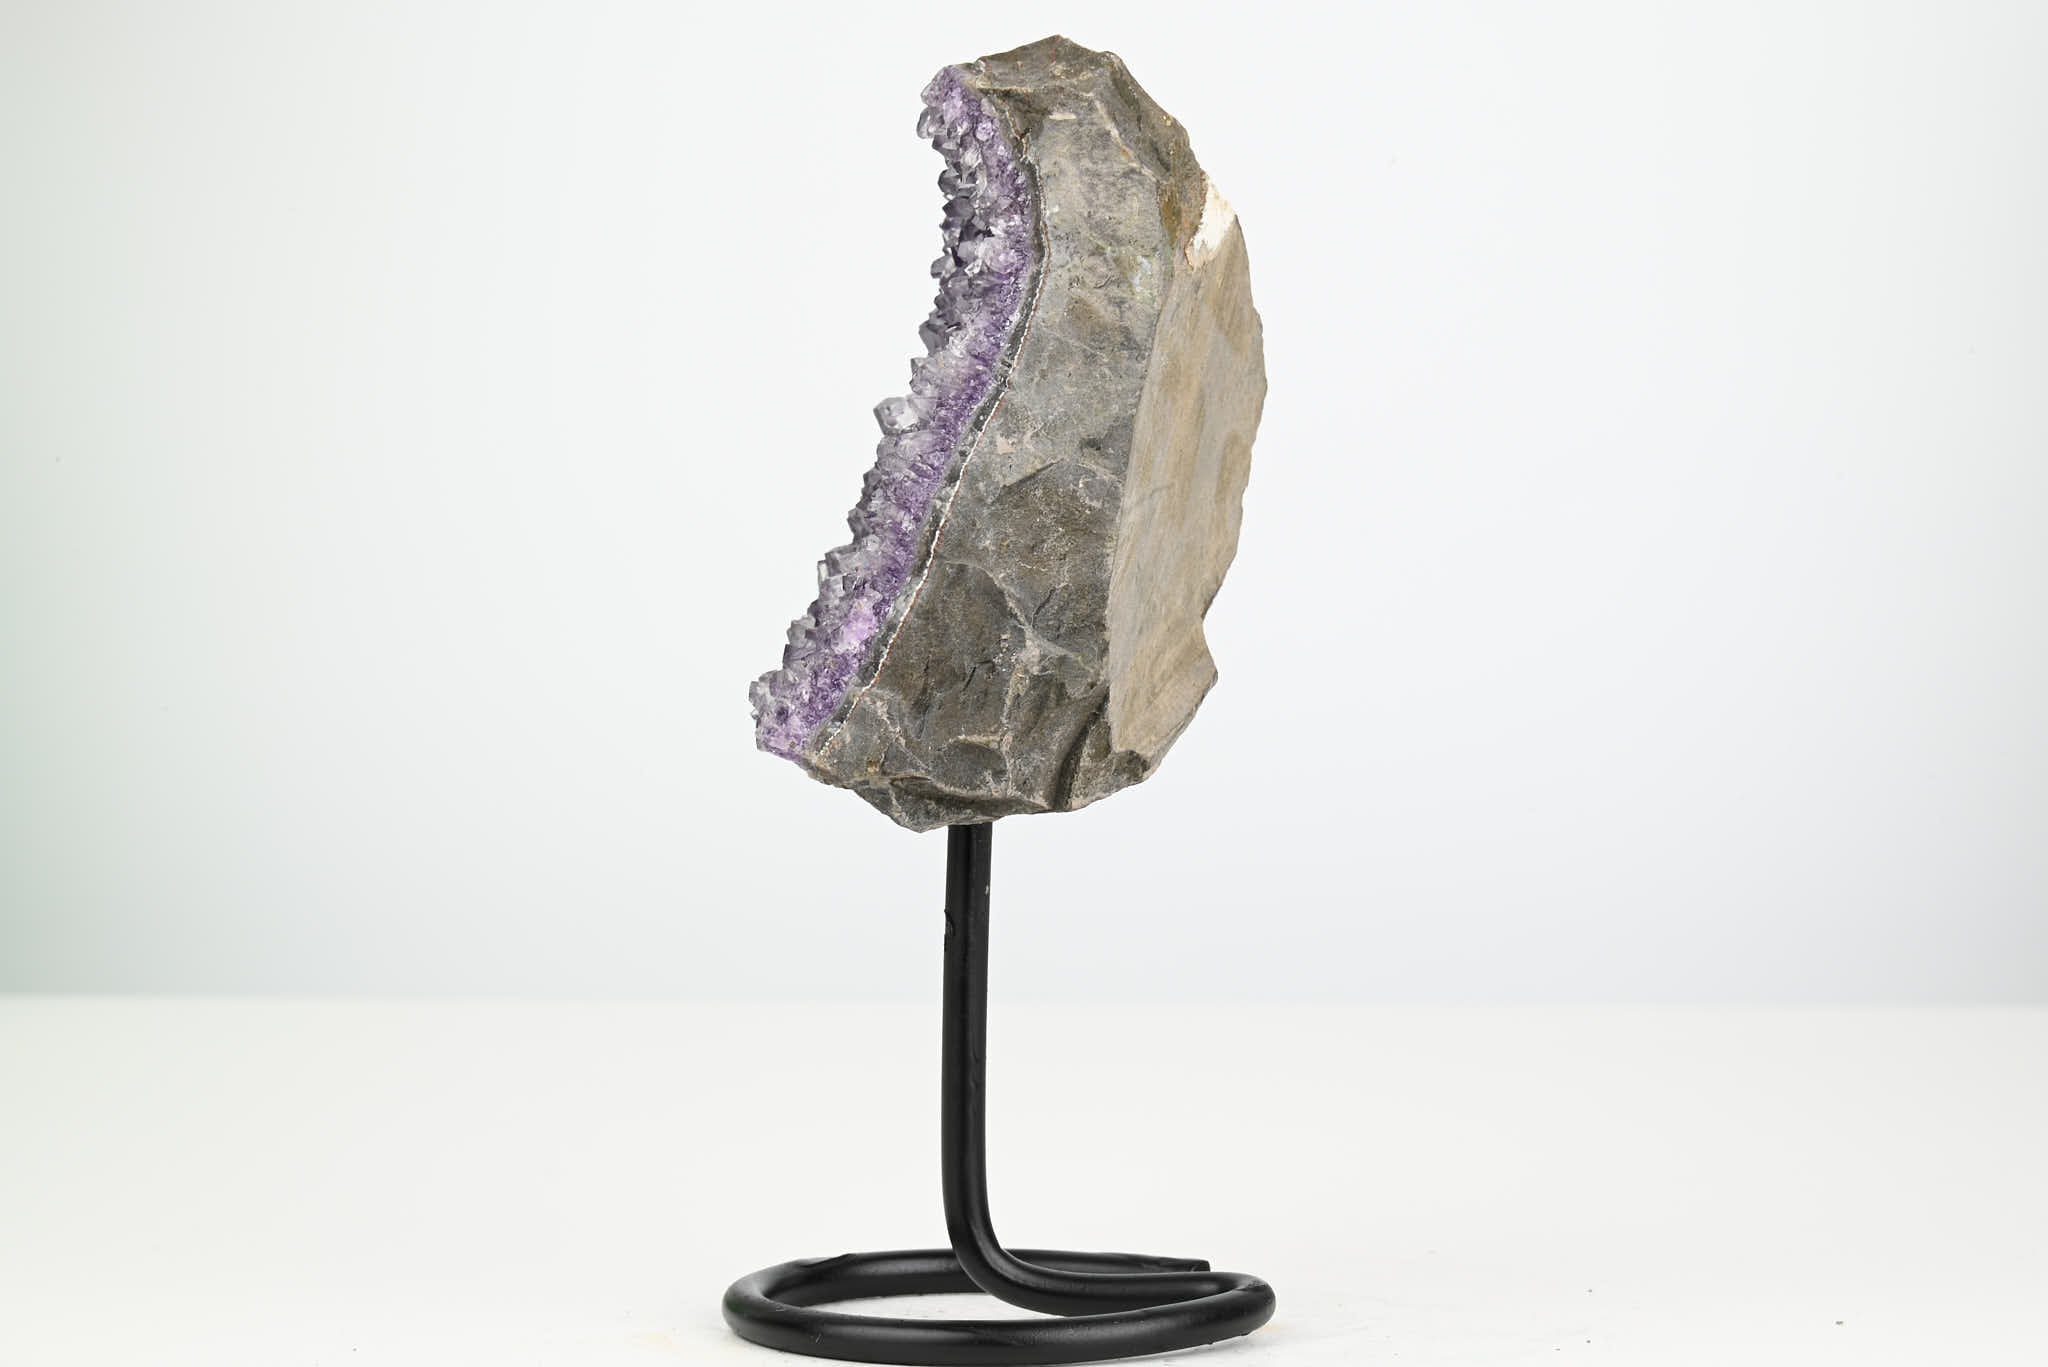 Amethyst Cluster on Stand - Small 16cm Tall - #CLUSAM-63040